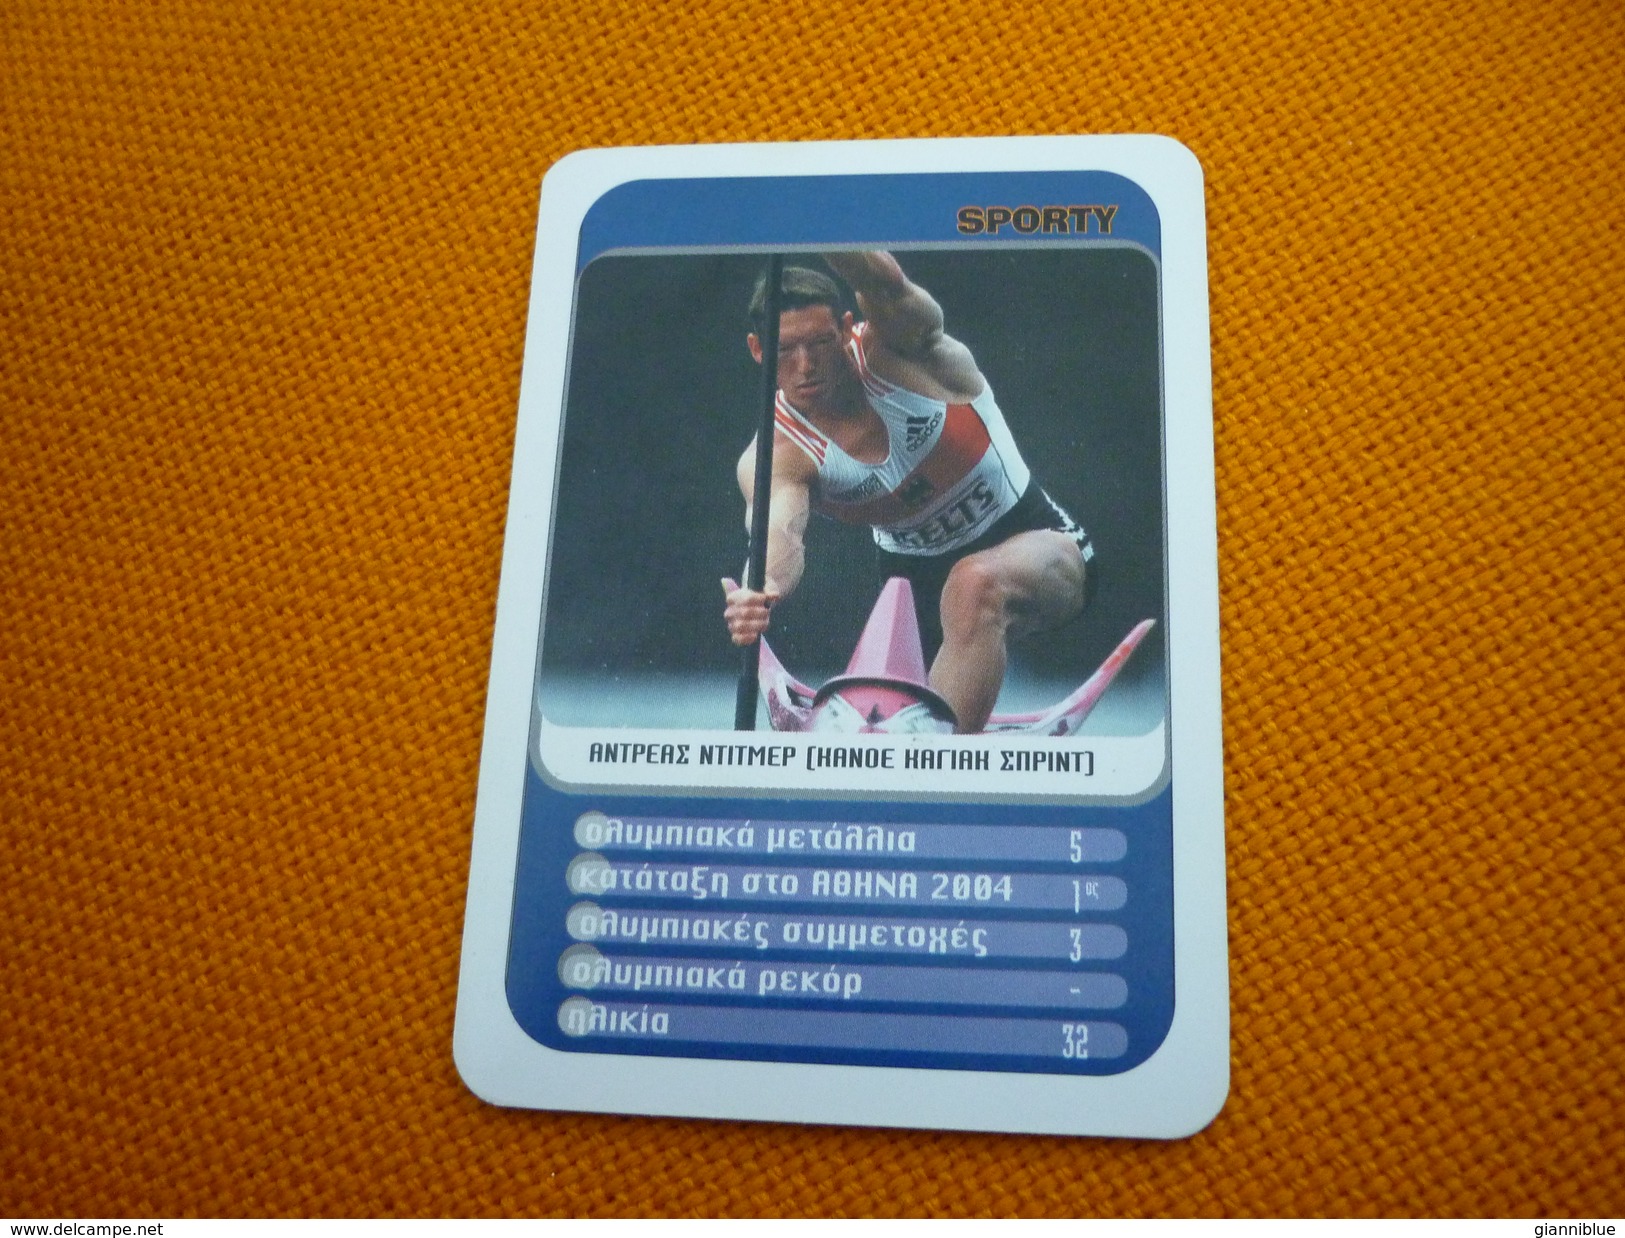 Andreas Dittmer German Sprint Canoer Canoeing Canoe Athens 2004 Olympic Games Medalist Greece Greek Trading Card - Trading Cards